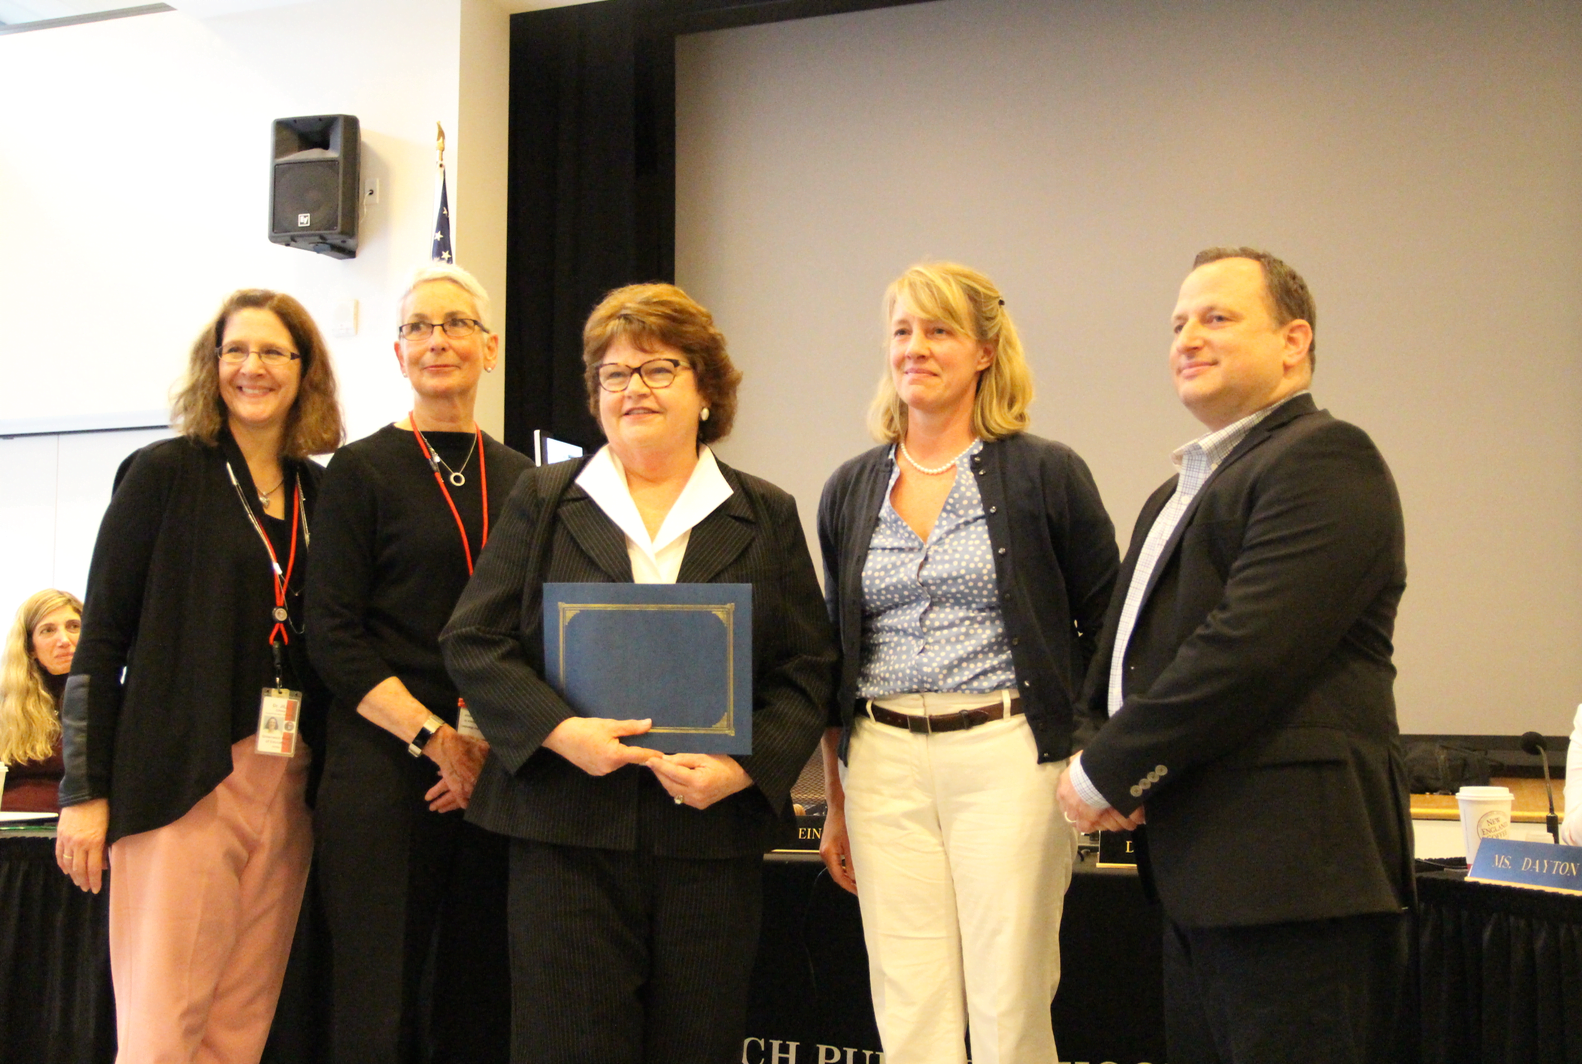 Ms. Oxer was recognized for this accomplishment at the May 17 Board of Education meeting at Hamilton Avenue School.